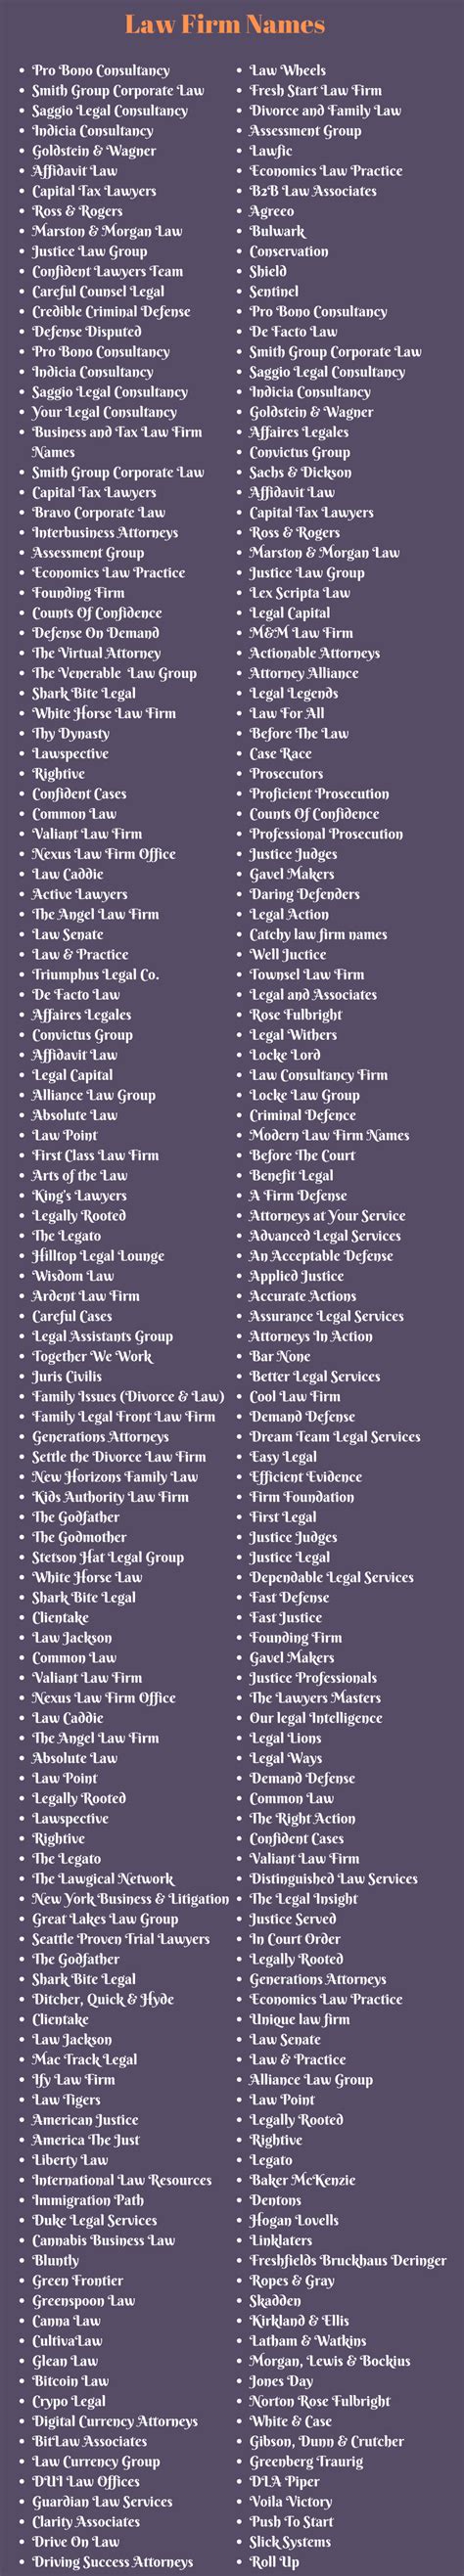 Law Firm Names 400 Names For Law Firms And Lawyers